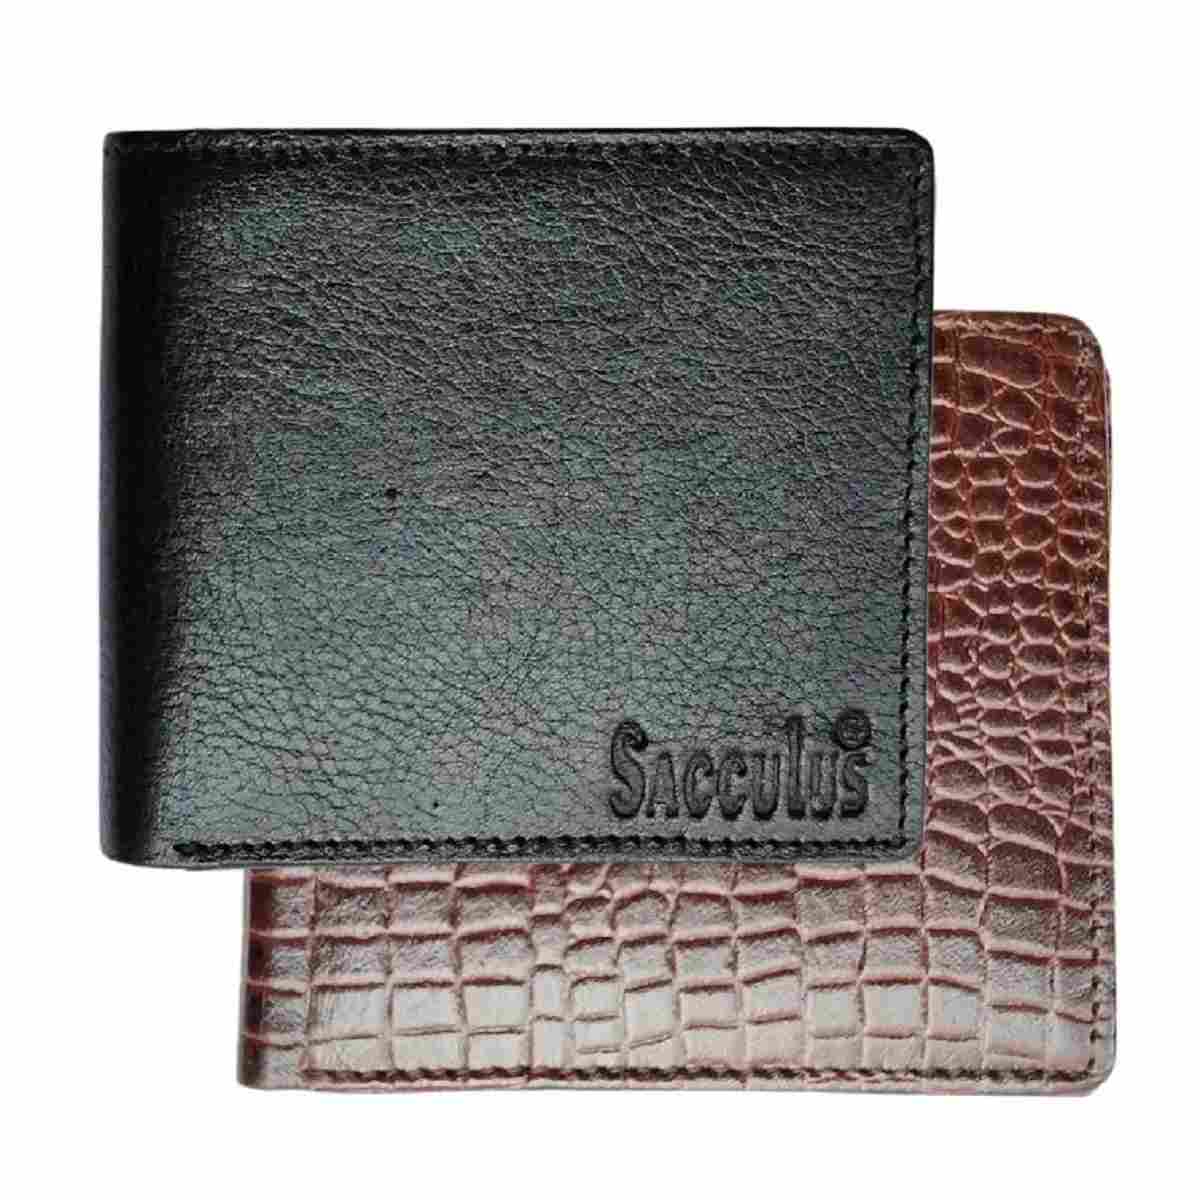 E2004 Genuine Leather Wallets for Men Pack of 2-